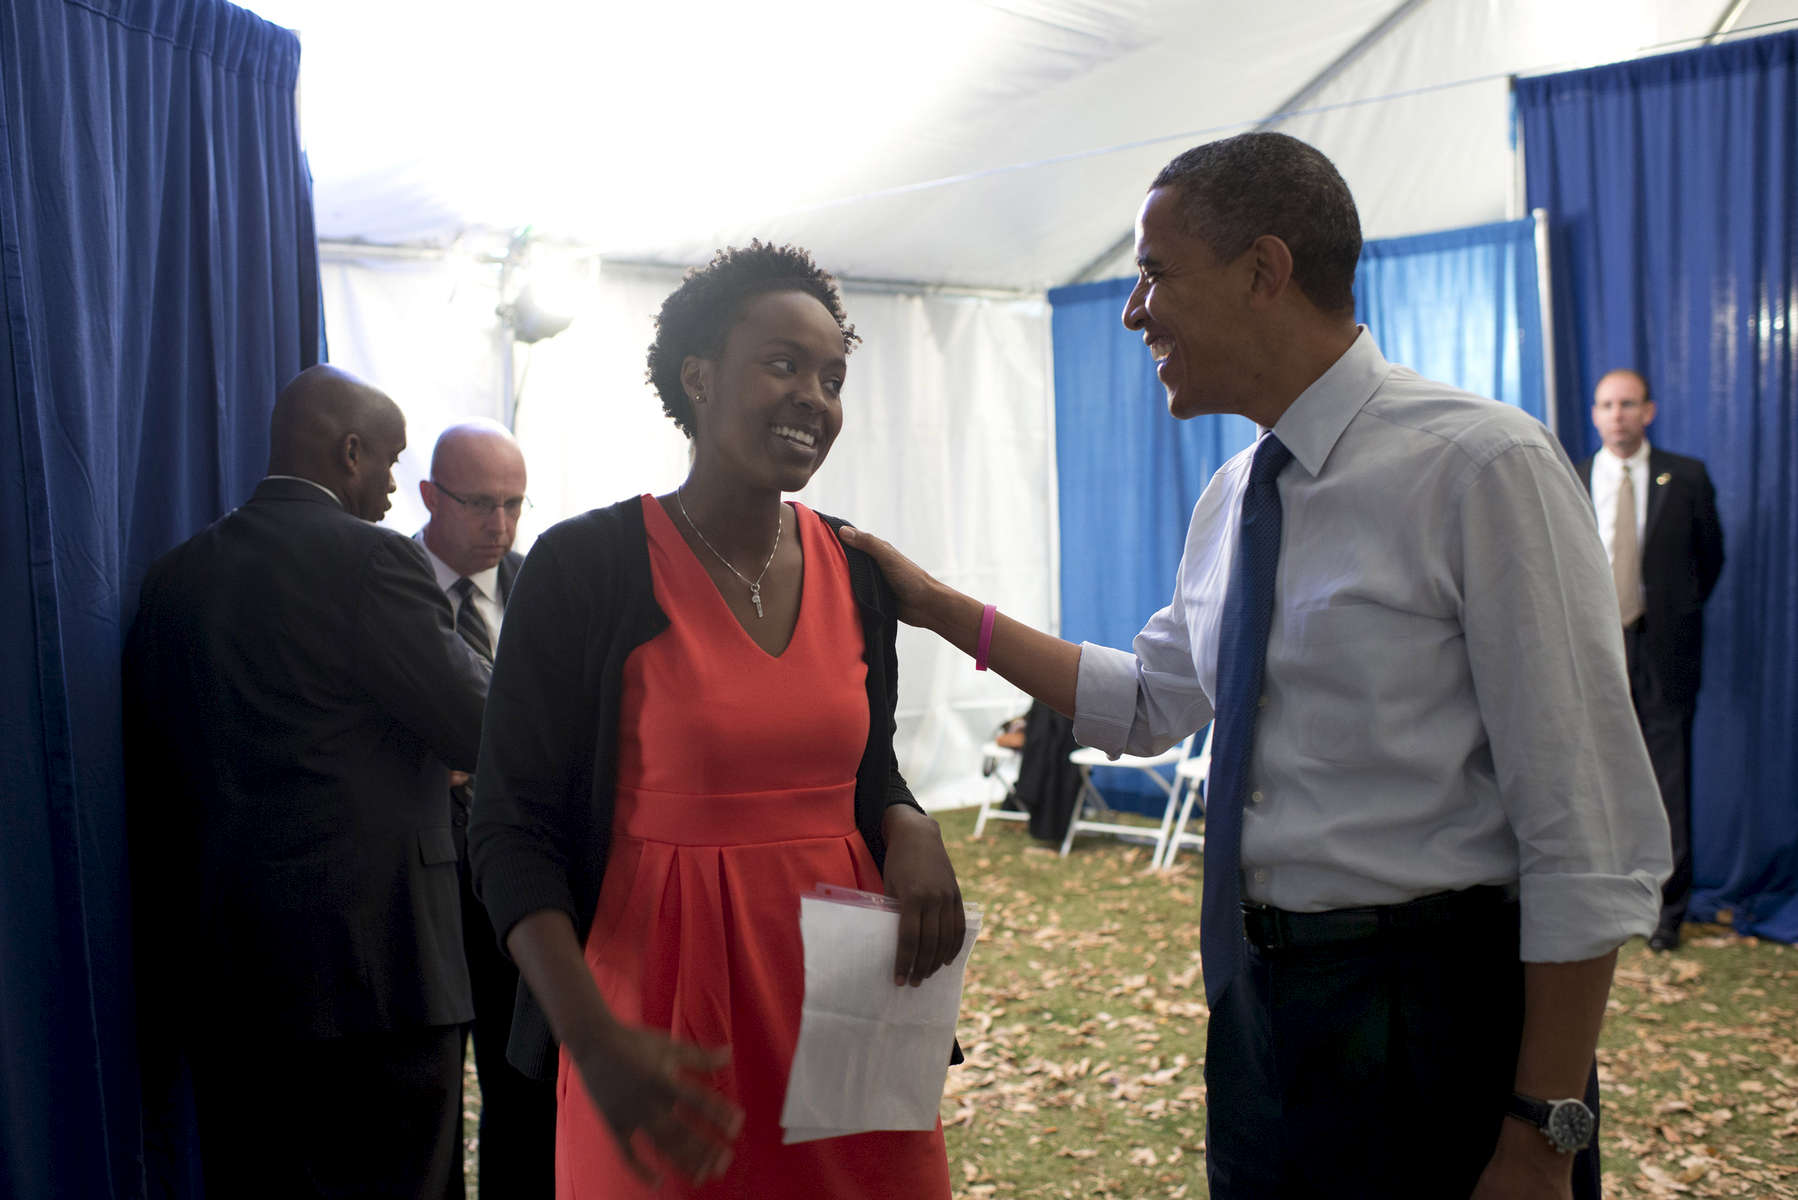 October 24, 2012-  Denver, CO: President Barack Obama chats backstage with Sidra Bonner, a former star student-athlete at Cornell and current Denver-area community health care working, before she introduces him at a rally in Denver, his second stop on a 48 hour swing of straight events. (Scout Tufankjian for Obama for America/Polaris)